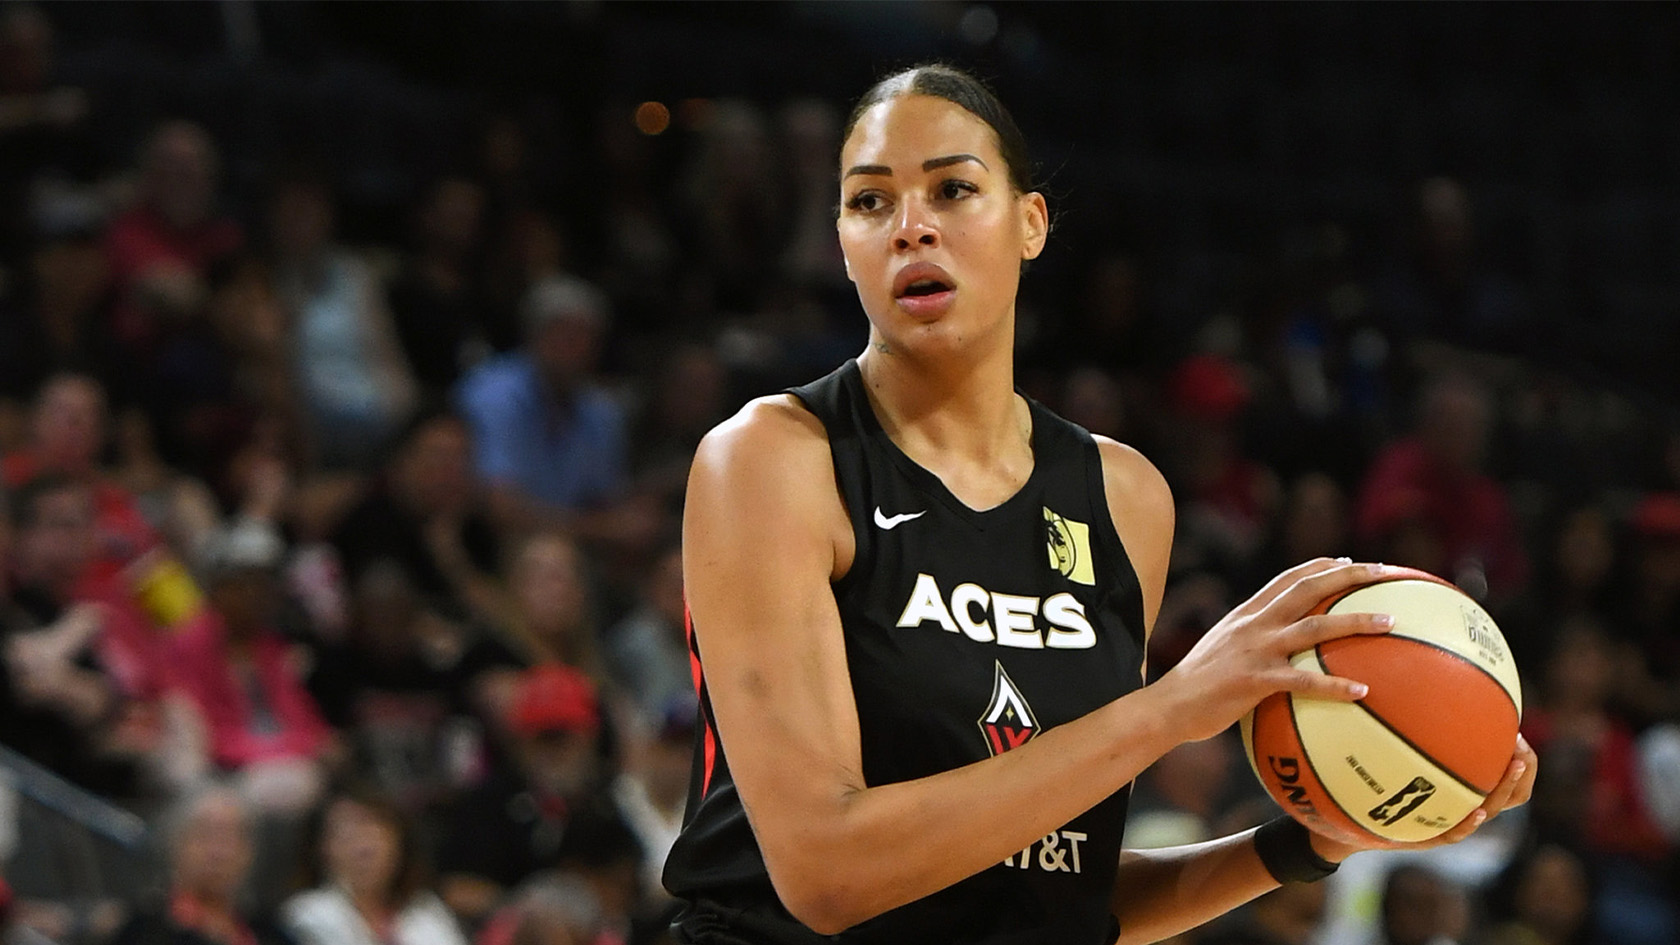 Aussie Basketball Star Liz Cambage Gets Real About The Appeal Of